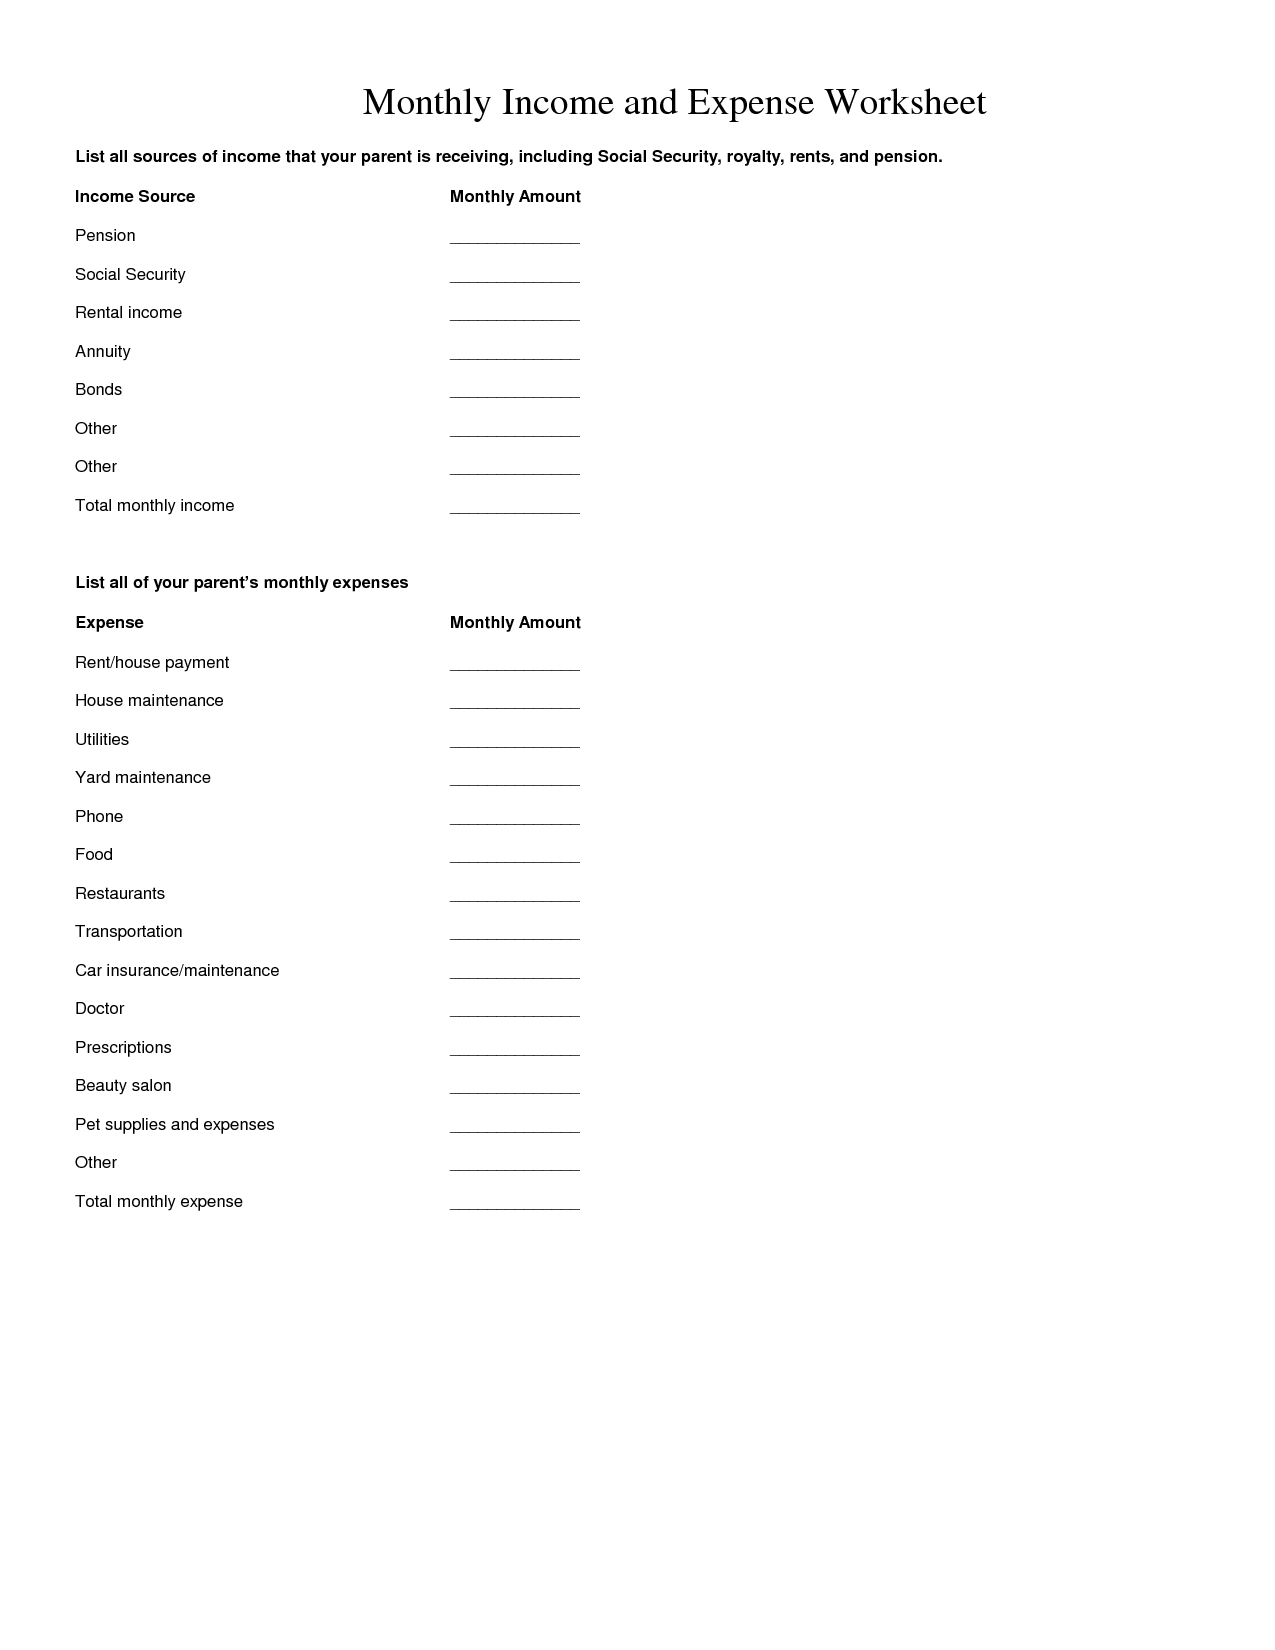 Monthly Income Expense Worksheet Template Image